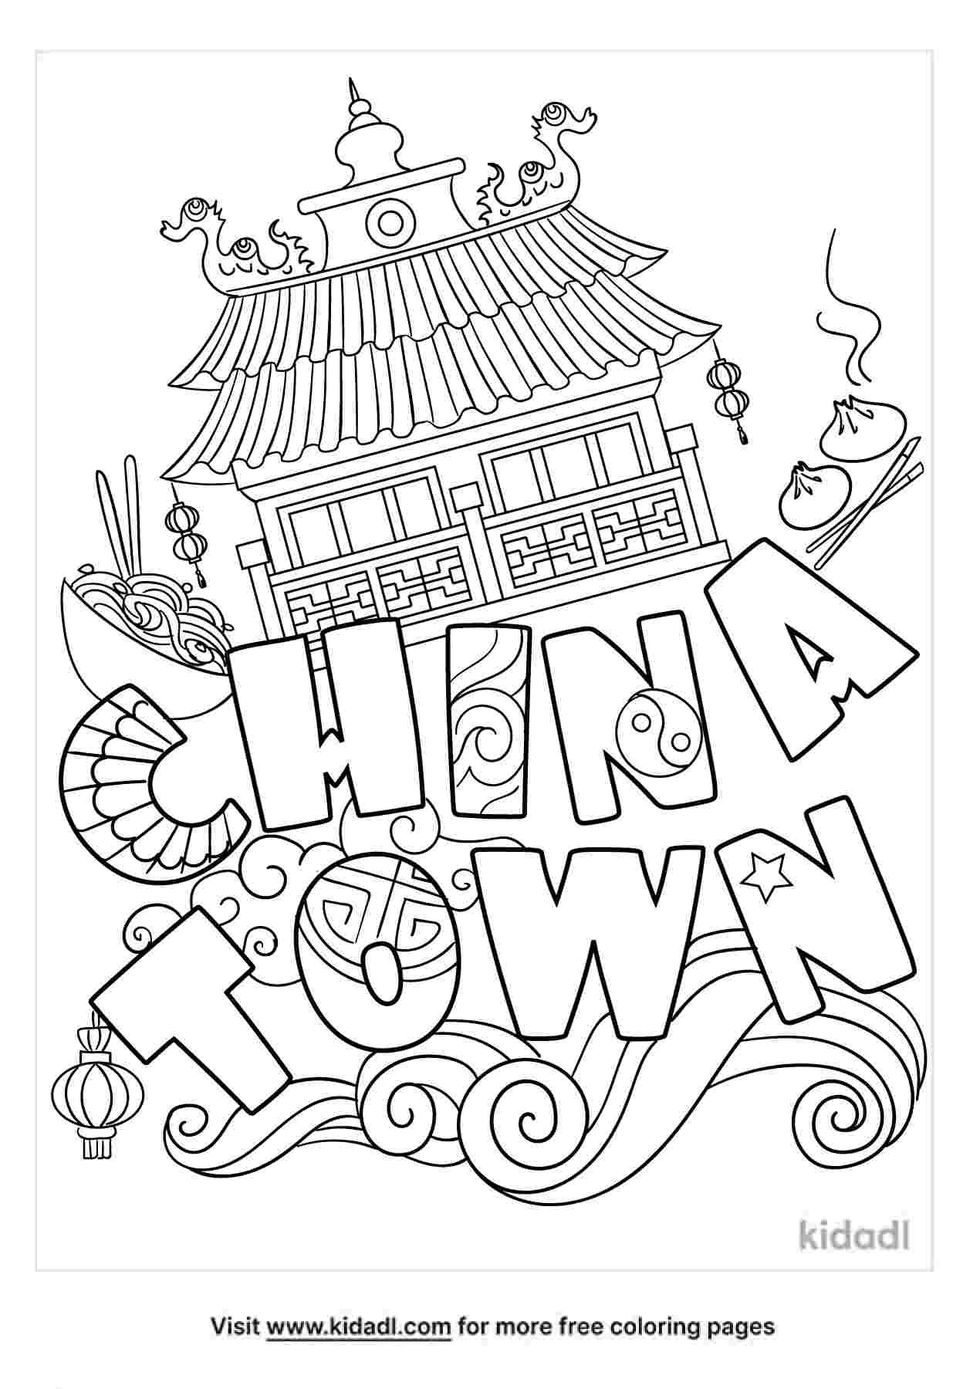 coloring page containing chinatown